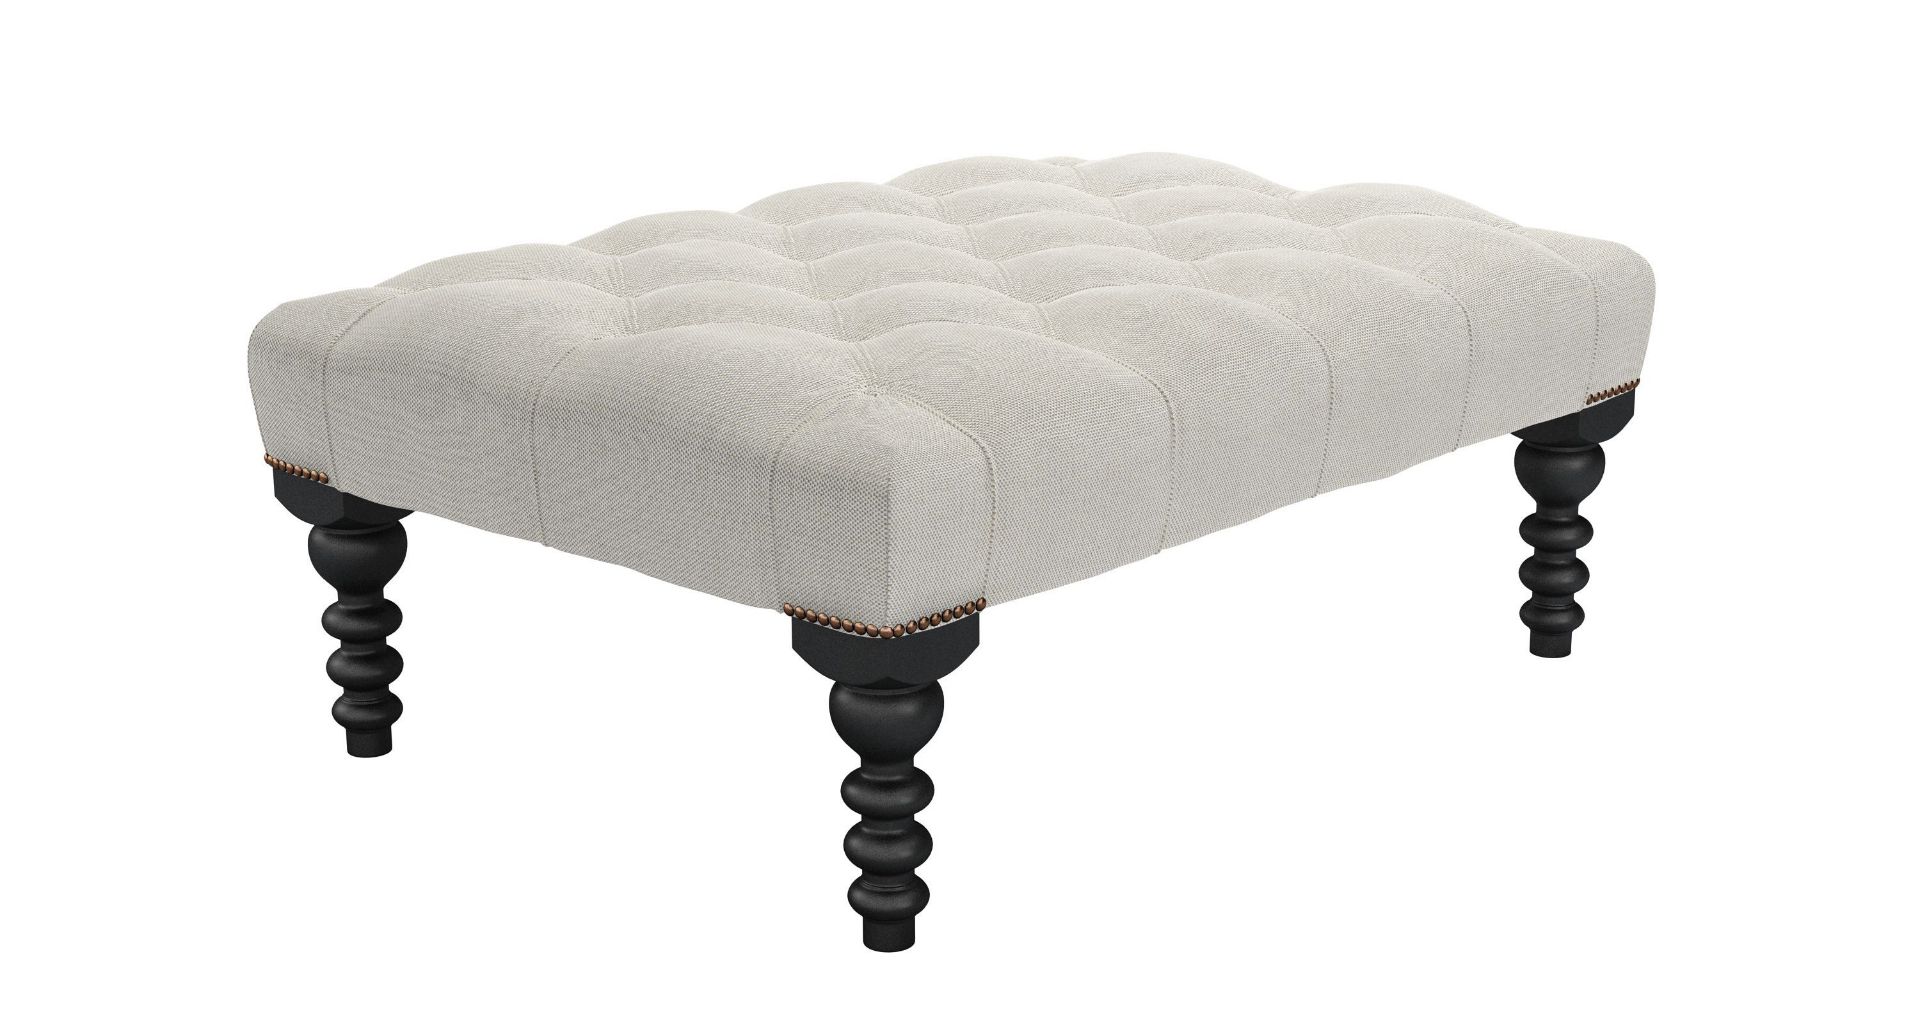 Valentin Medium Rectangle Footstool In Clay House Basket Weave RRP - £460